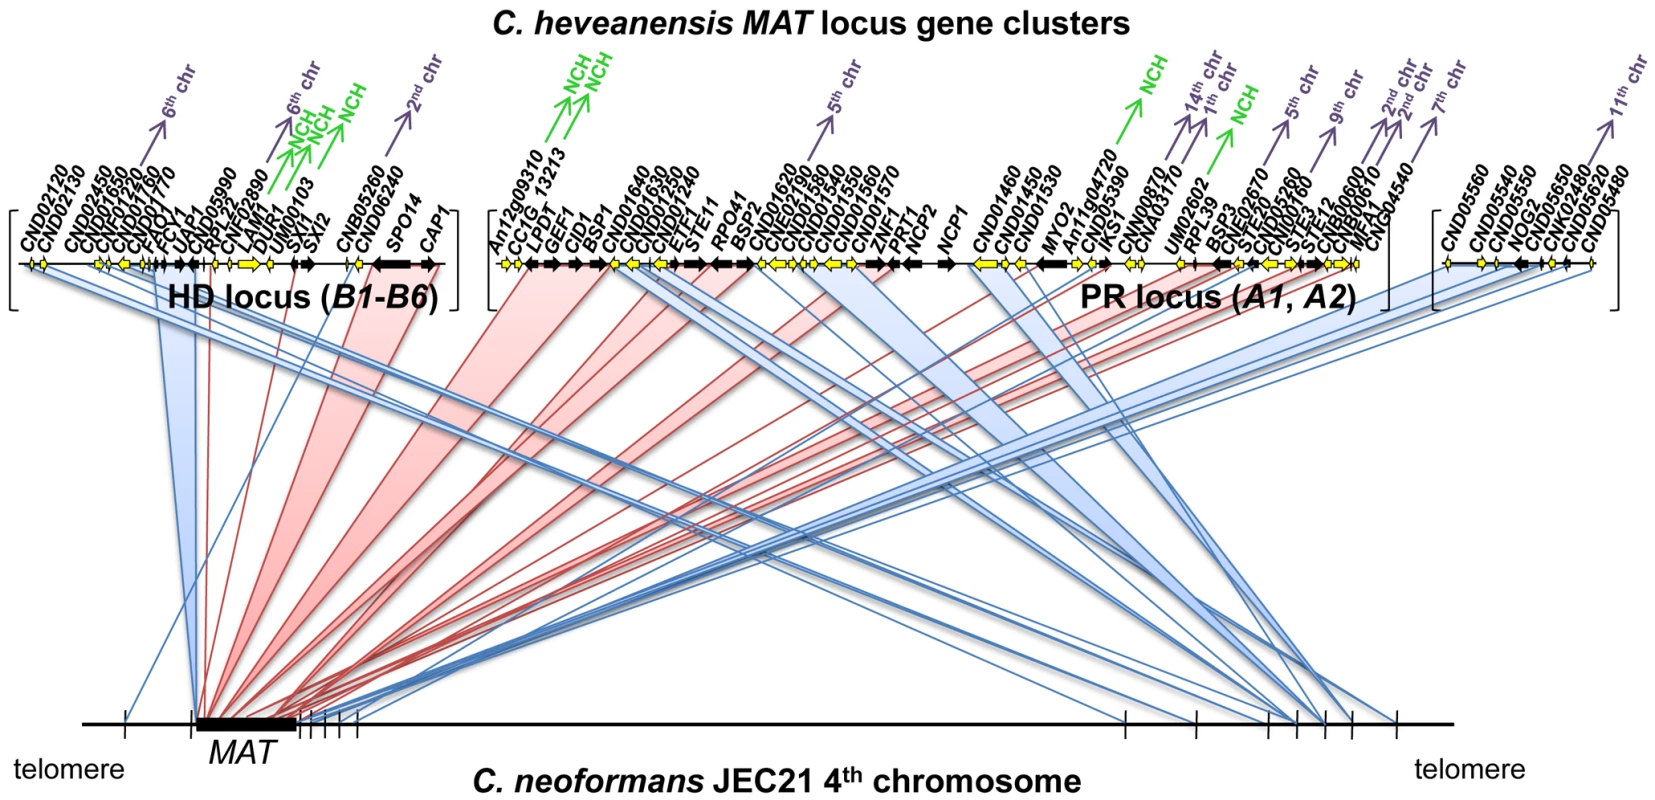 <i>C. heveanensis MAT</i> locus region shares synteny with the 4<sup>th</sup> chromosome of <i>C. neoformans</i> JEC21.